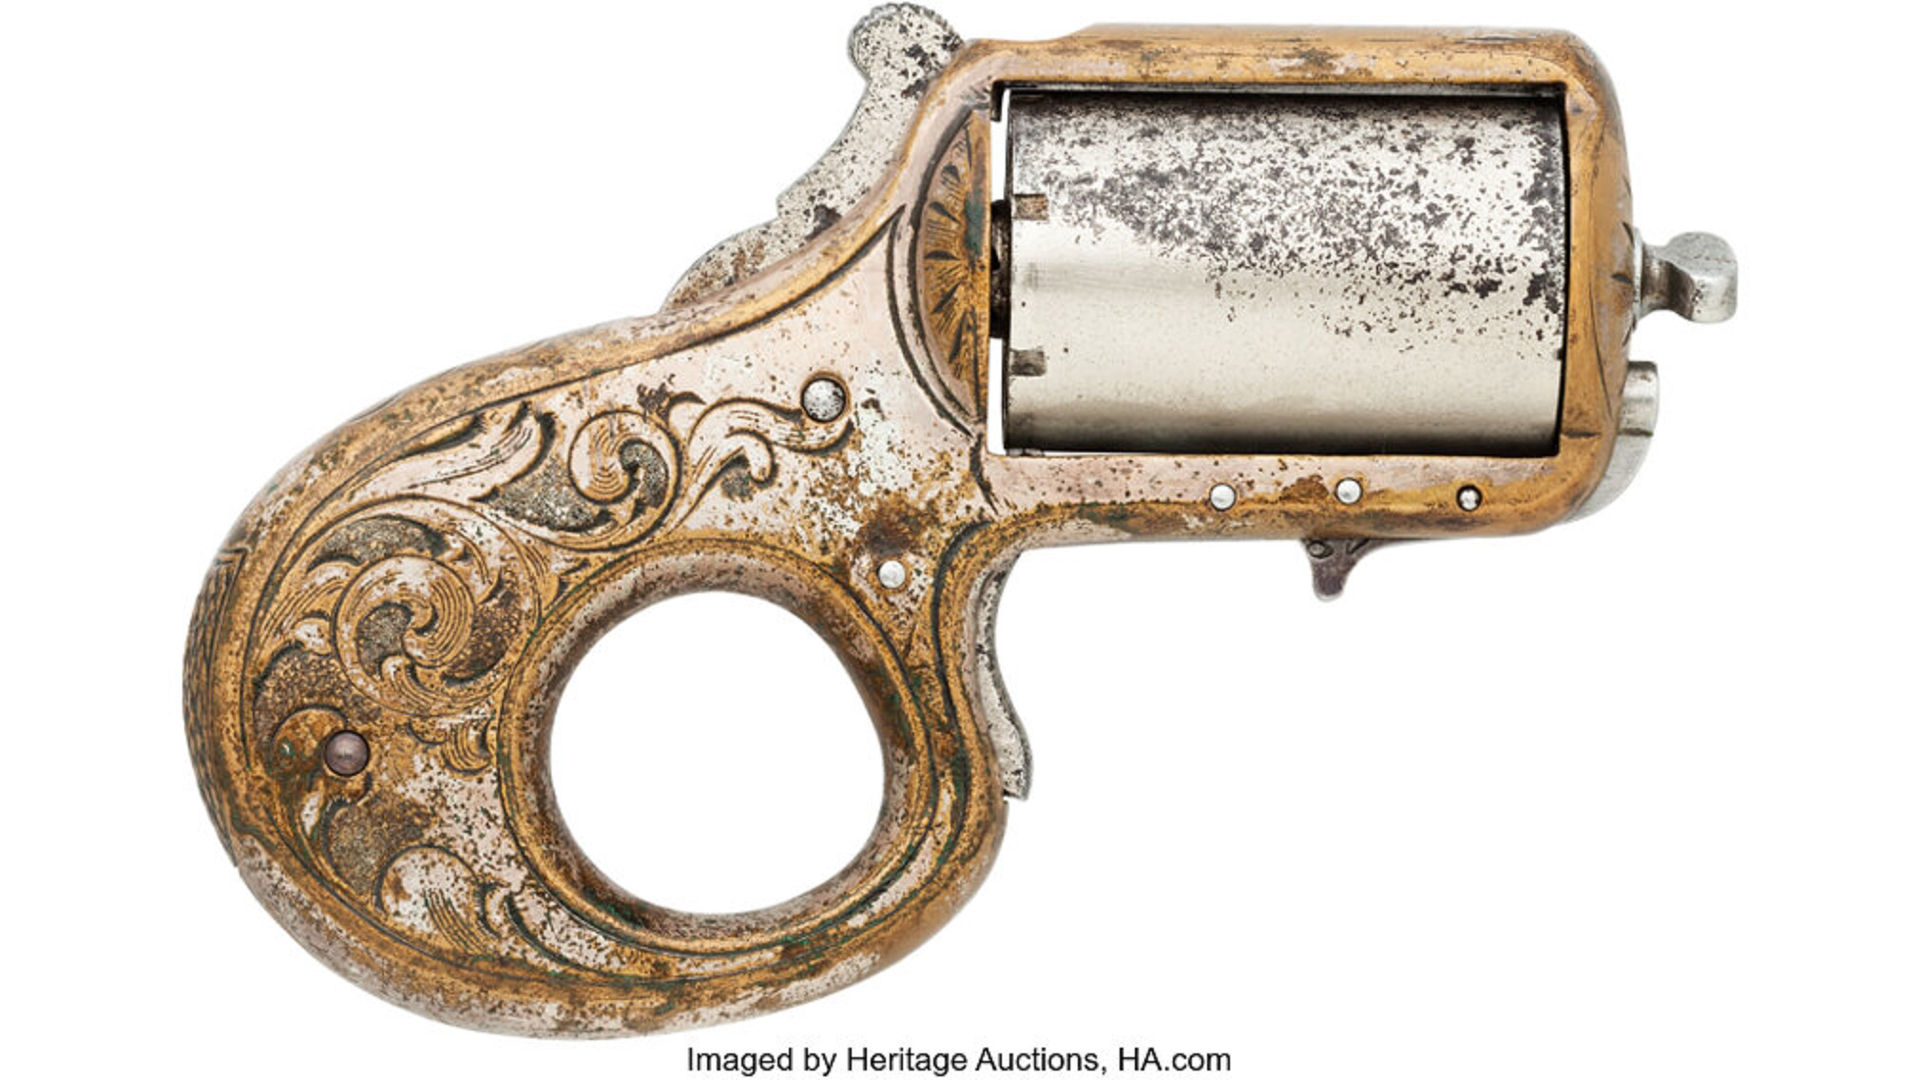 James Reid knuckle-duster revolver right-side view text noting IMAGED BY HERITAGE AUCTIONS, HA.COM